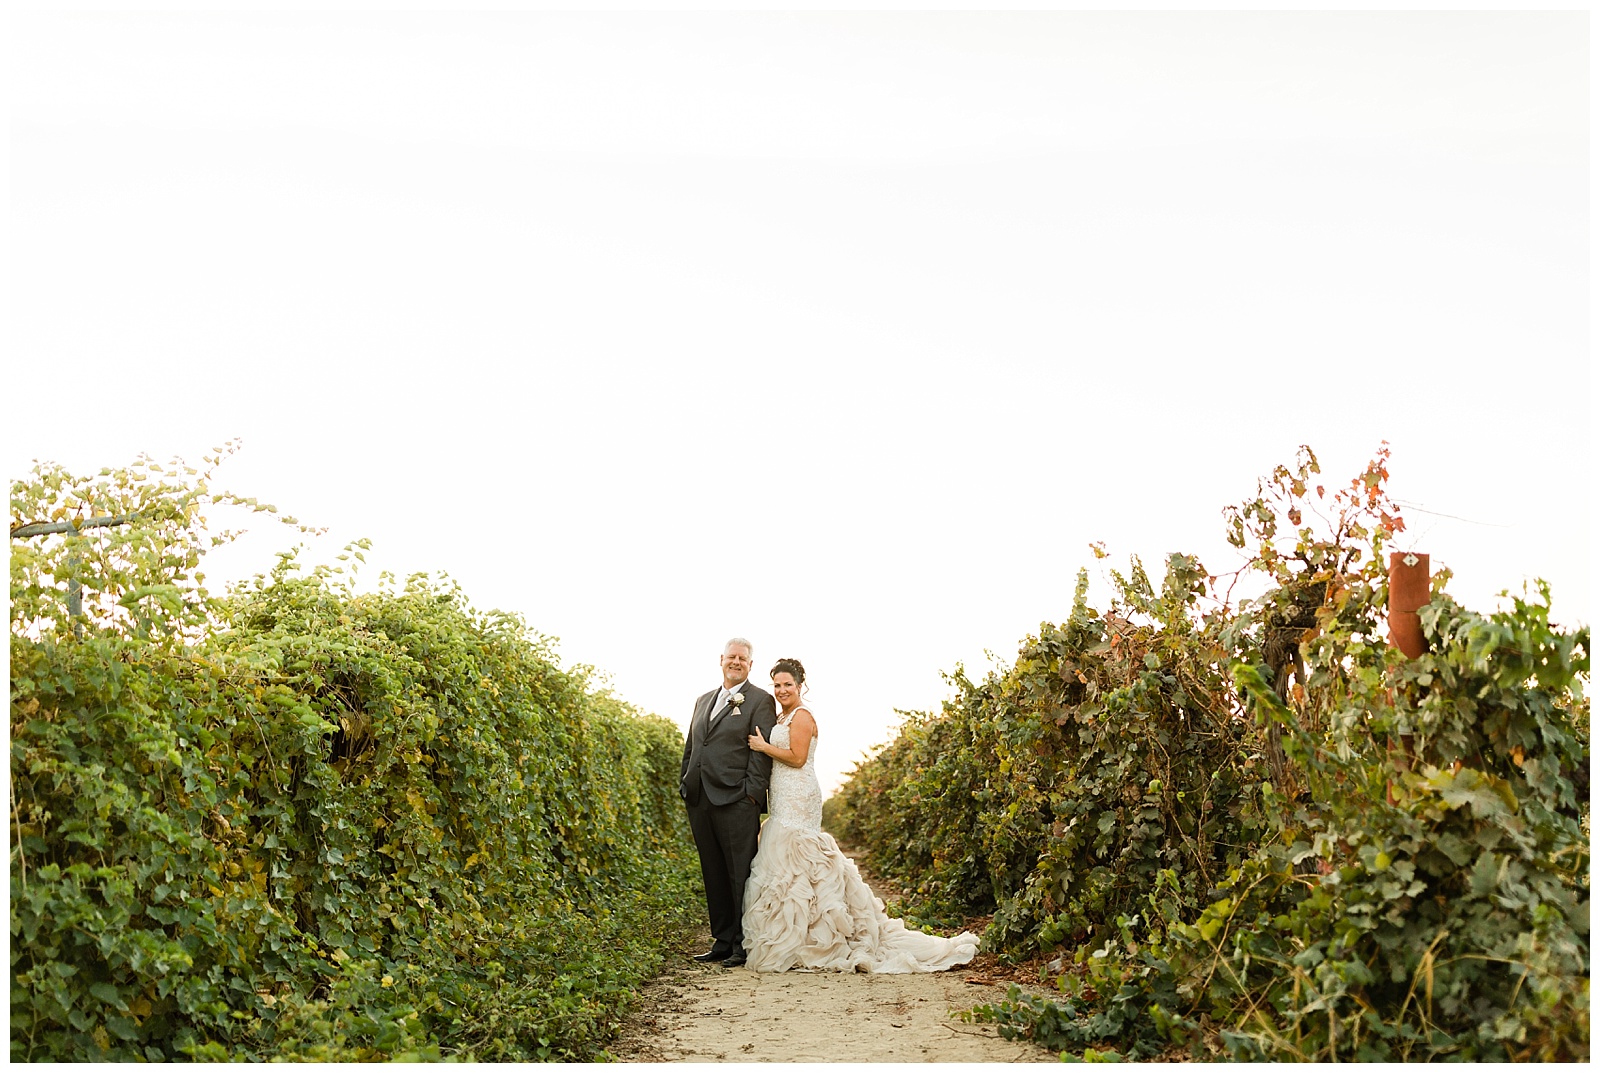 romantic sunset wedding portraits in a vineyard at englemann cellars in frenso